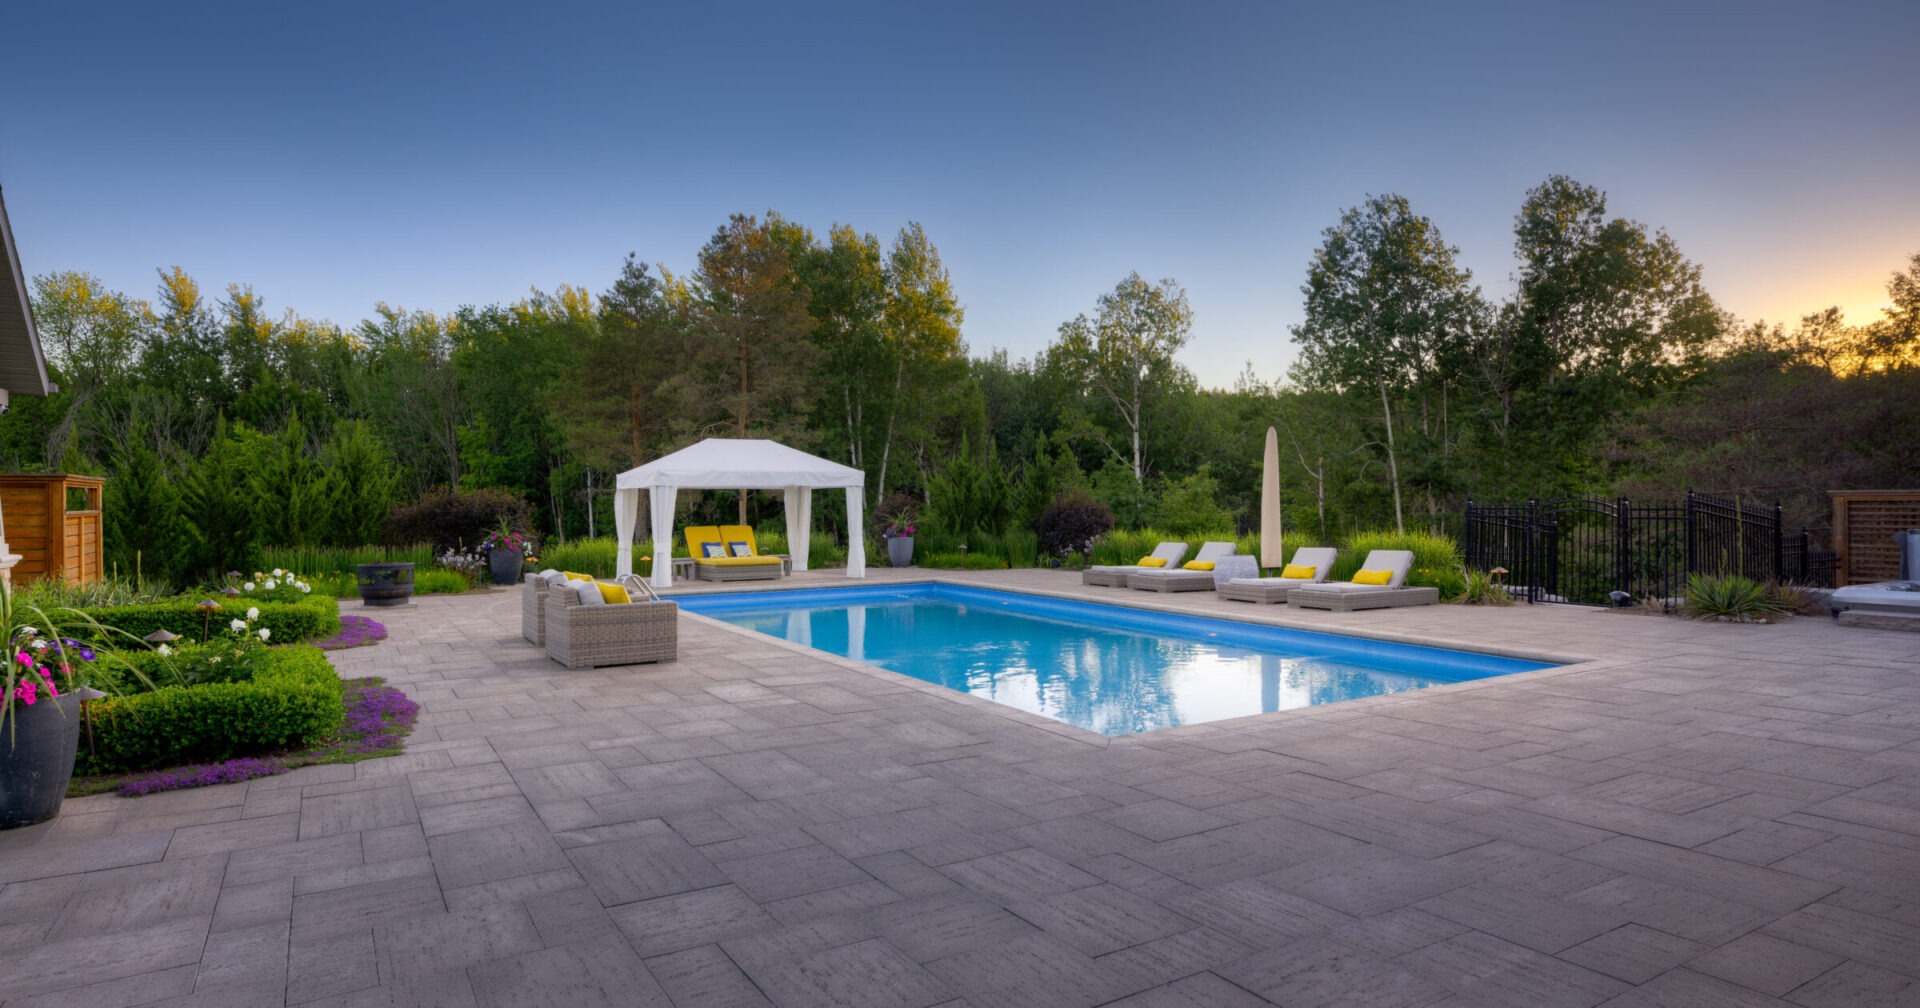 Luxurious backyard with a rectangular pool, patio, loungers, gazebo, and garden at twilight, surrounded by lush trees and a clear sky.